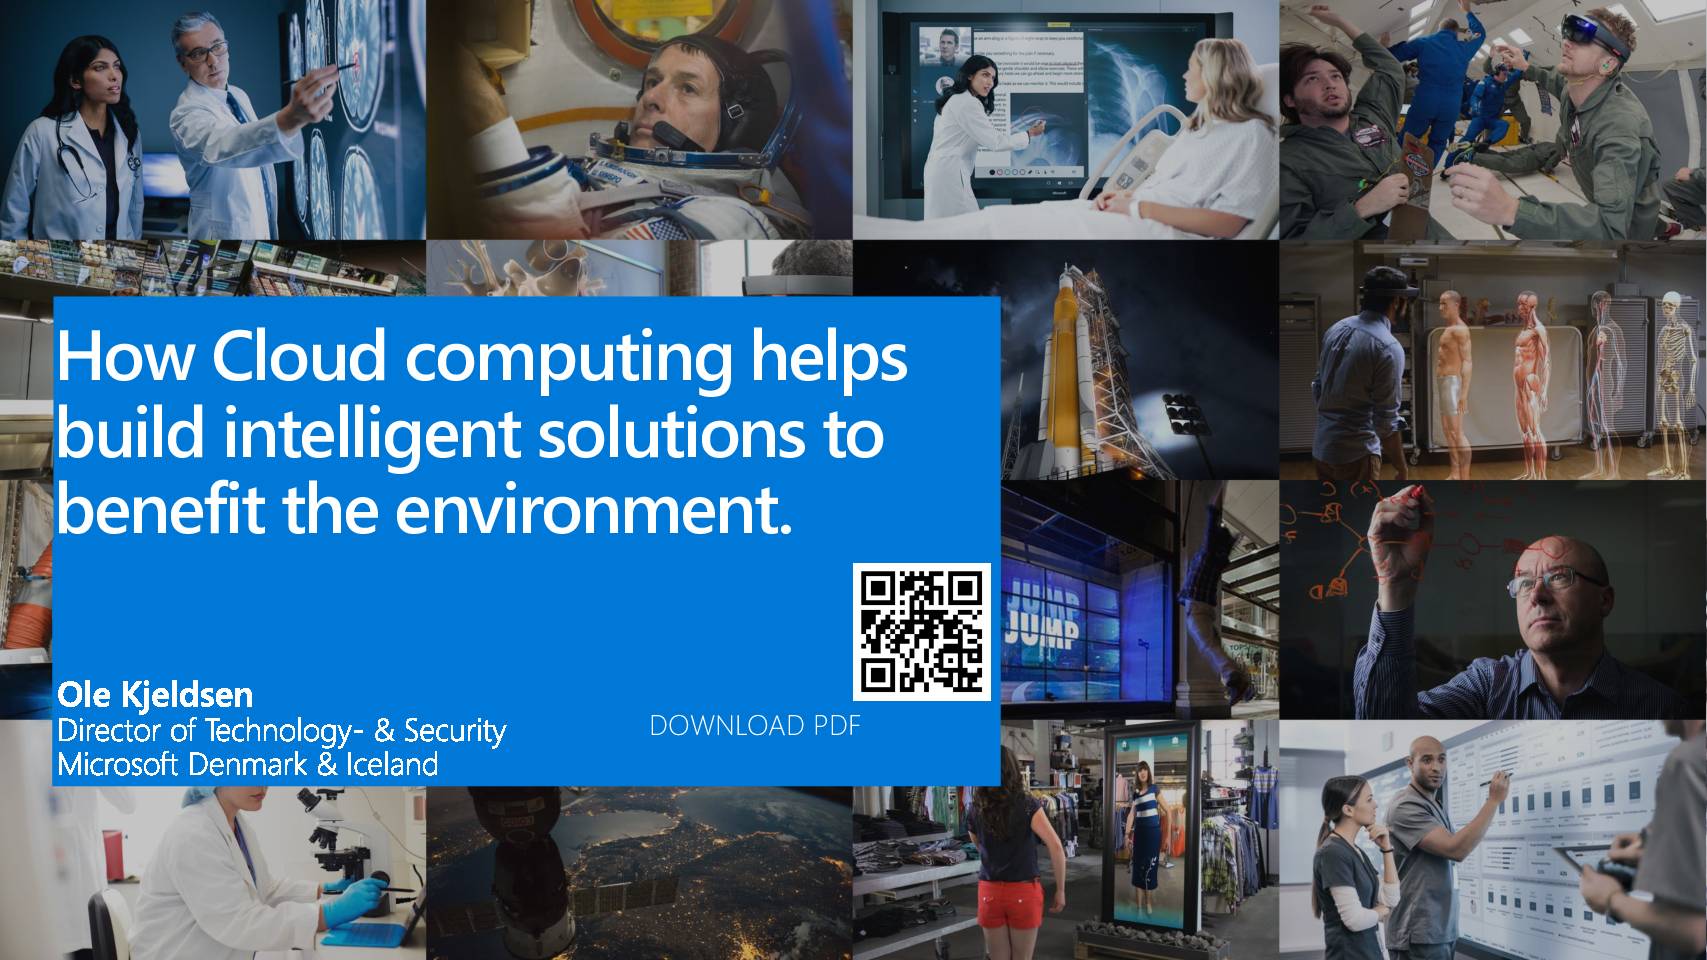 How Cloud computing helps build intelligent solutions to benefit the environment (Presentation)